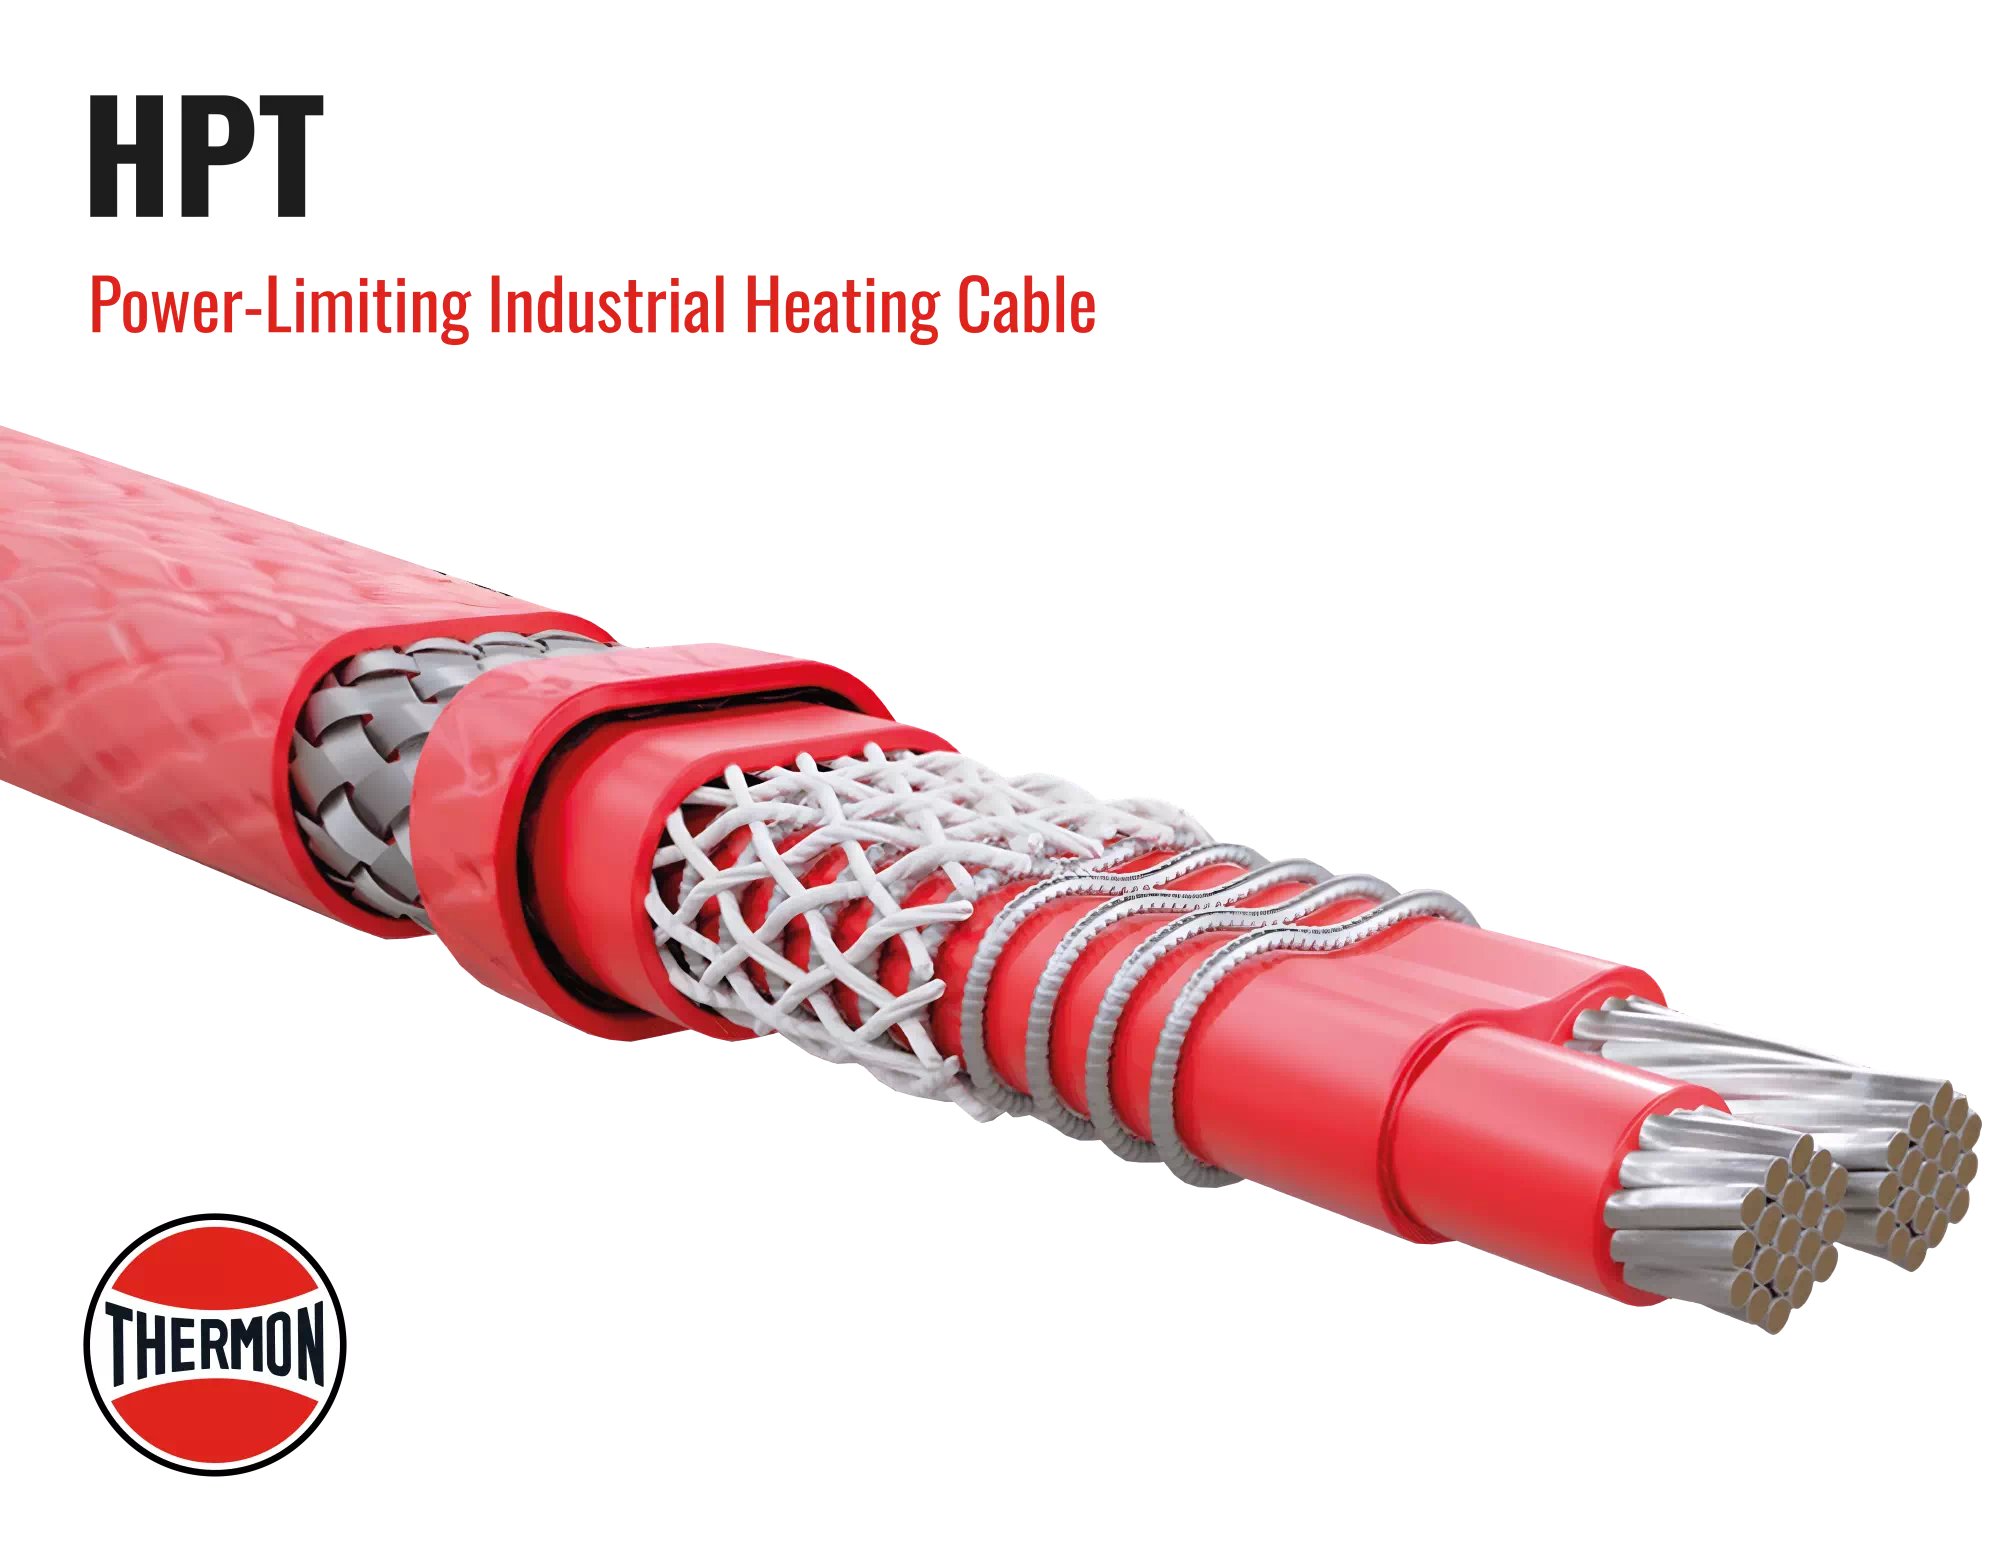 Thermon HPT-Power-Limiting-Heating-Cable